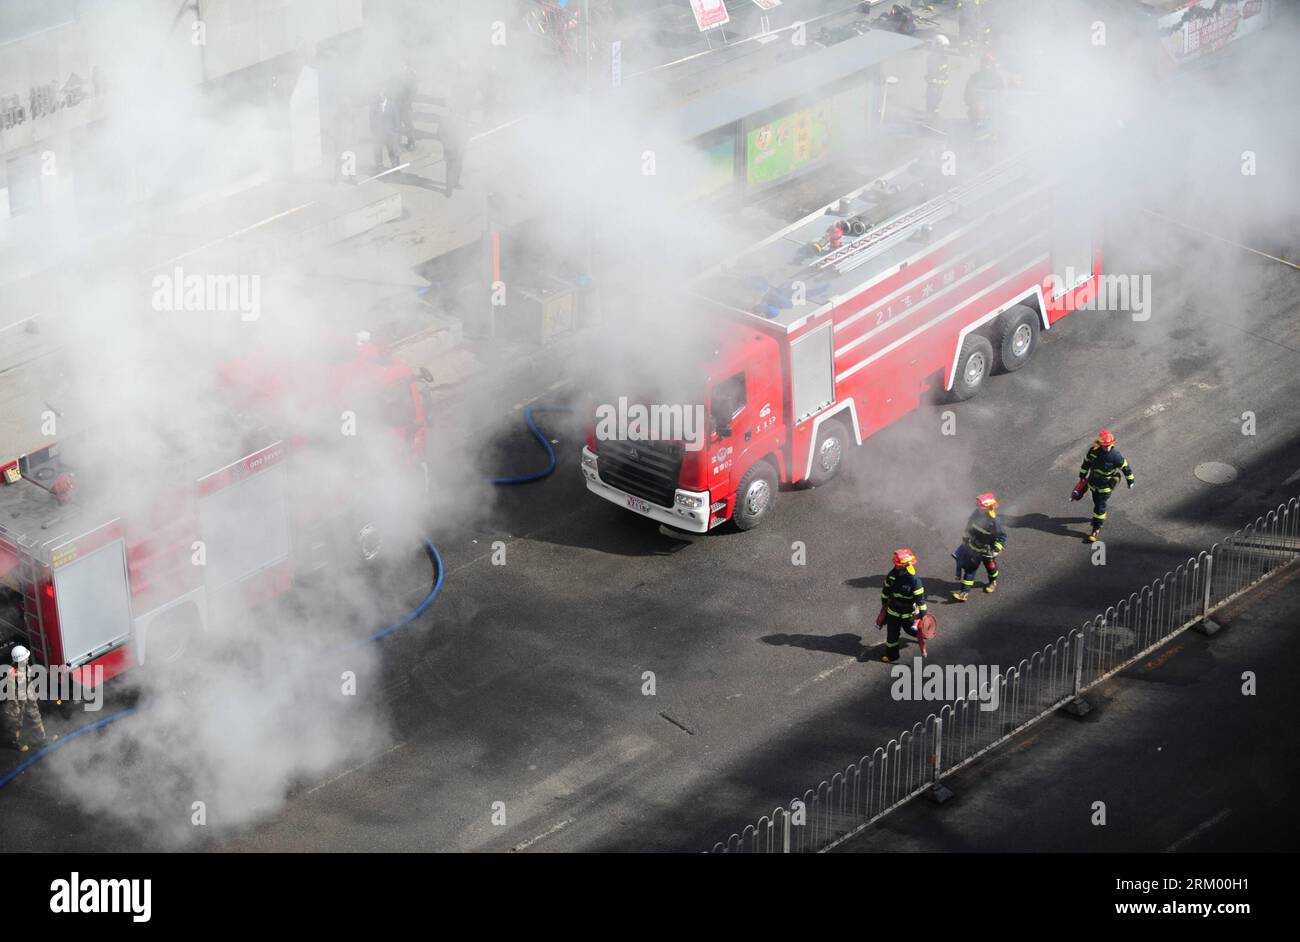 Bildnummer: 59296502  Datum: 04.03.2013  Copyright: imago/Xinhua (130304) -- SHENYANG, March 4, 2013 (Xinhua) -- Firefighters work at the accident site after a gas explosion occurred in an underground shopping street in Shenyang, capital of northeast China s Liaoning Province, March 4, 2013. More than 20 workers were injured in the explosion triggered by a gas leak from underground pipelines at a construction site in the underground shopping street in front of a shopping mall on Monday morning. Some 40 workers were at the scene at the time of the explosion. (Xinhua/Pan Yulong) (ry) CHINA-LIAON Stock Photo